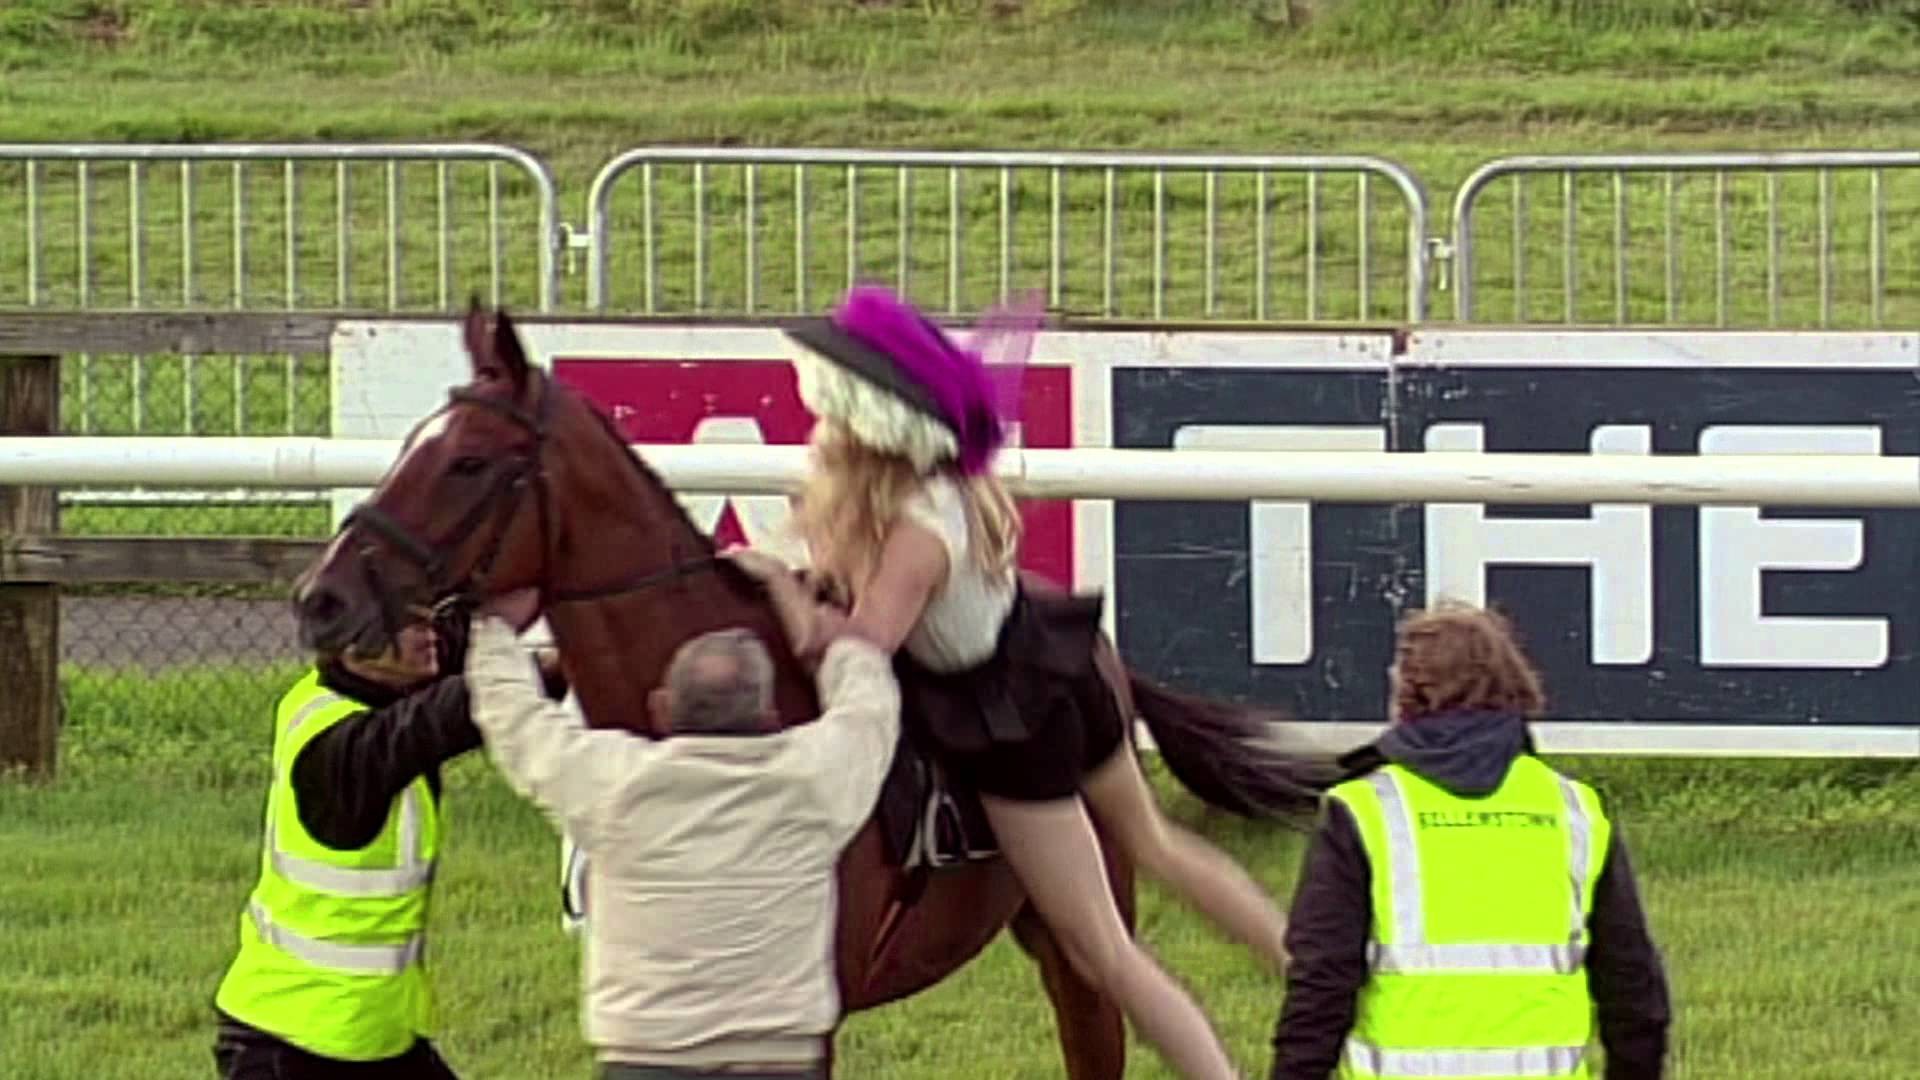 1920x1080 A Shocking Scene: Girl Steals A Horse In Front Of A Crowd!